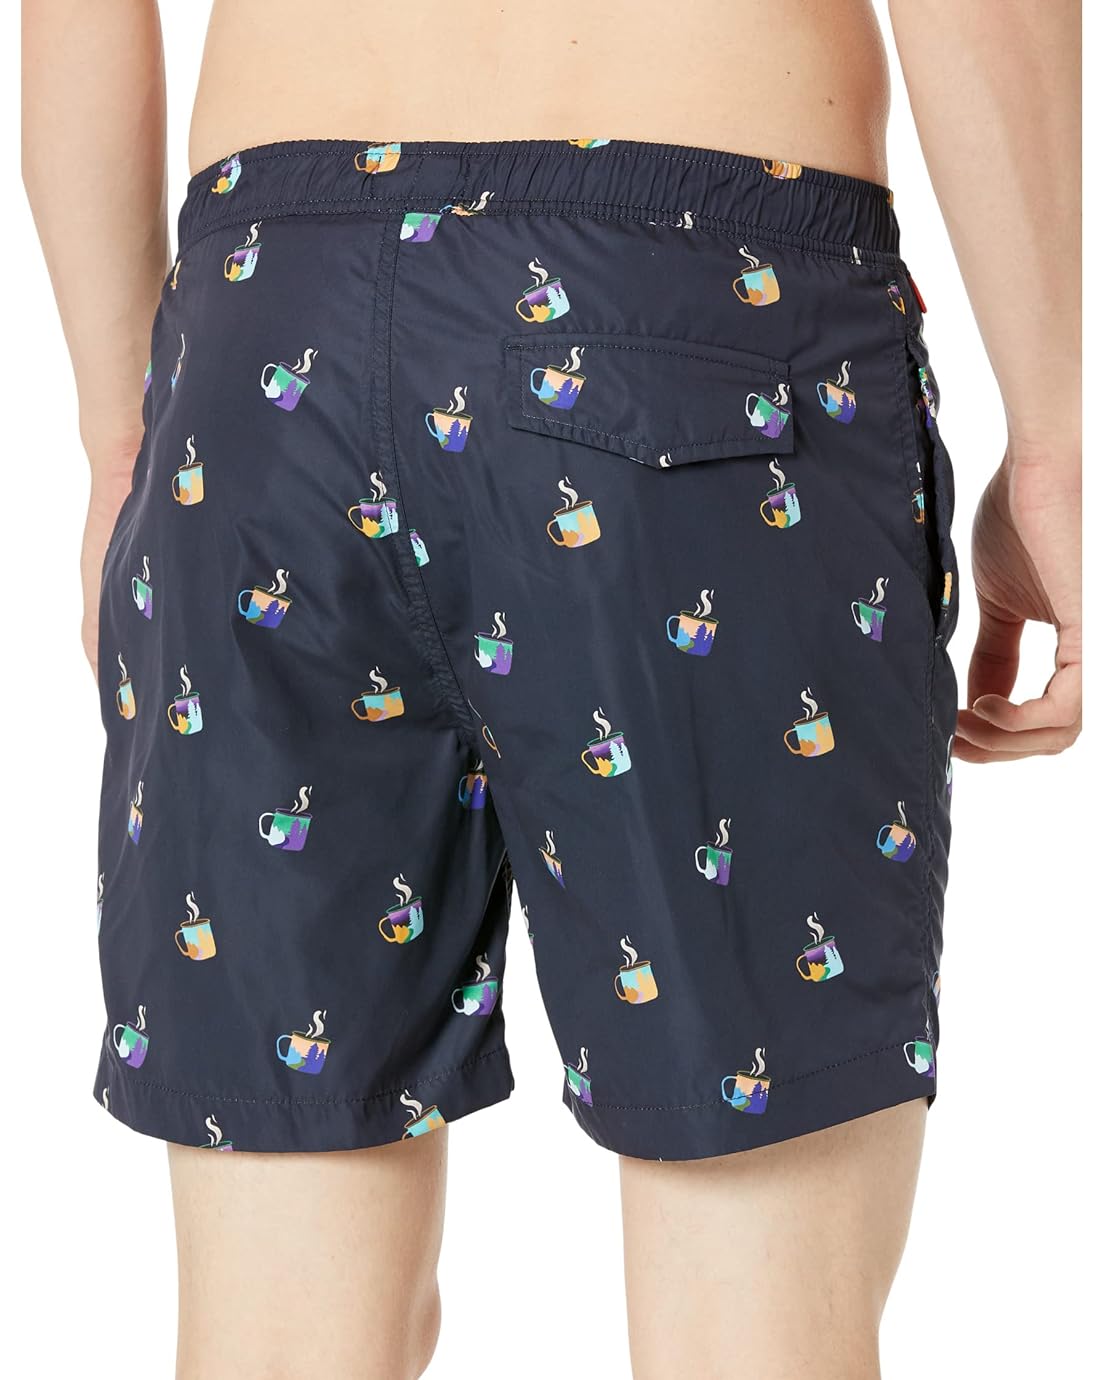  Scotch & Soda Mid Length Printed Swim Shorts in Recycled Polyester